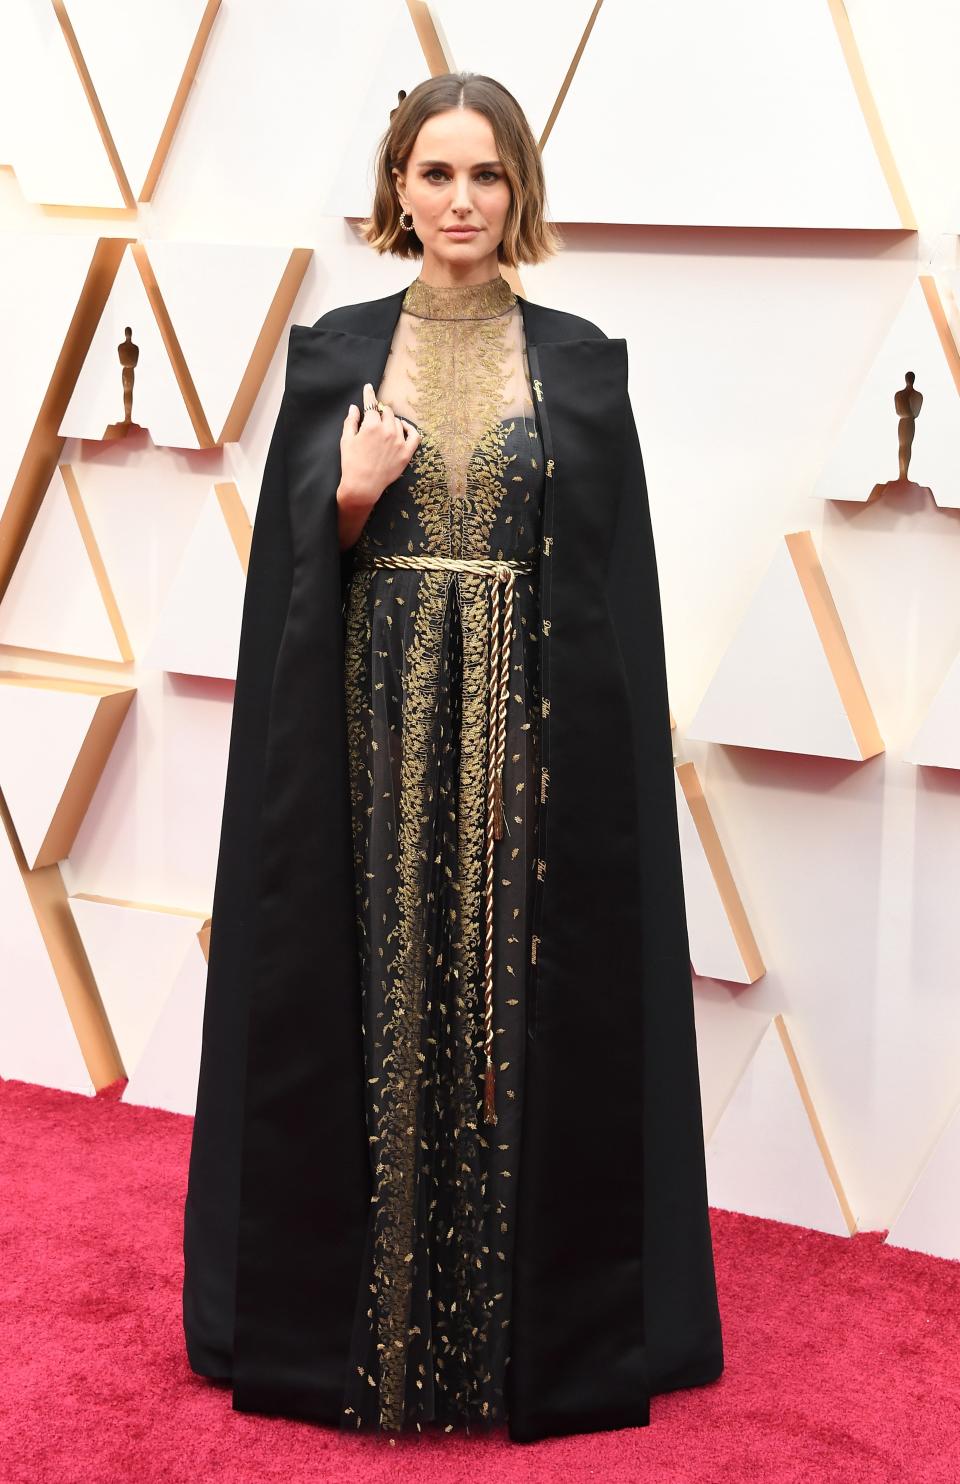 Natalie Portman in a black and gold dress and black cape on a red carpet